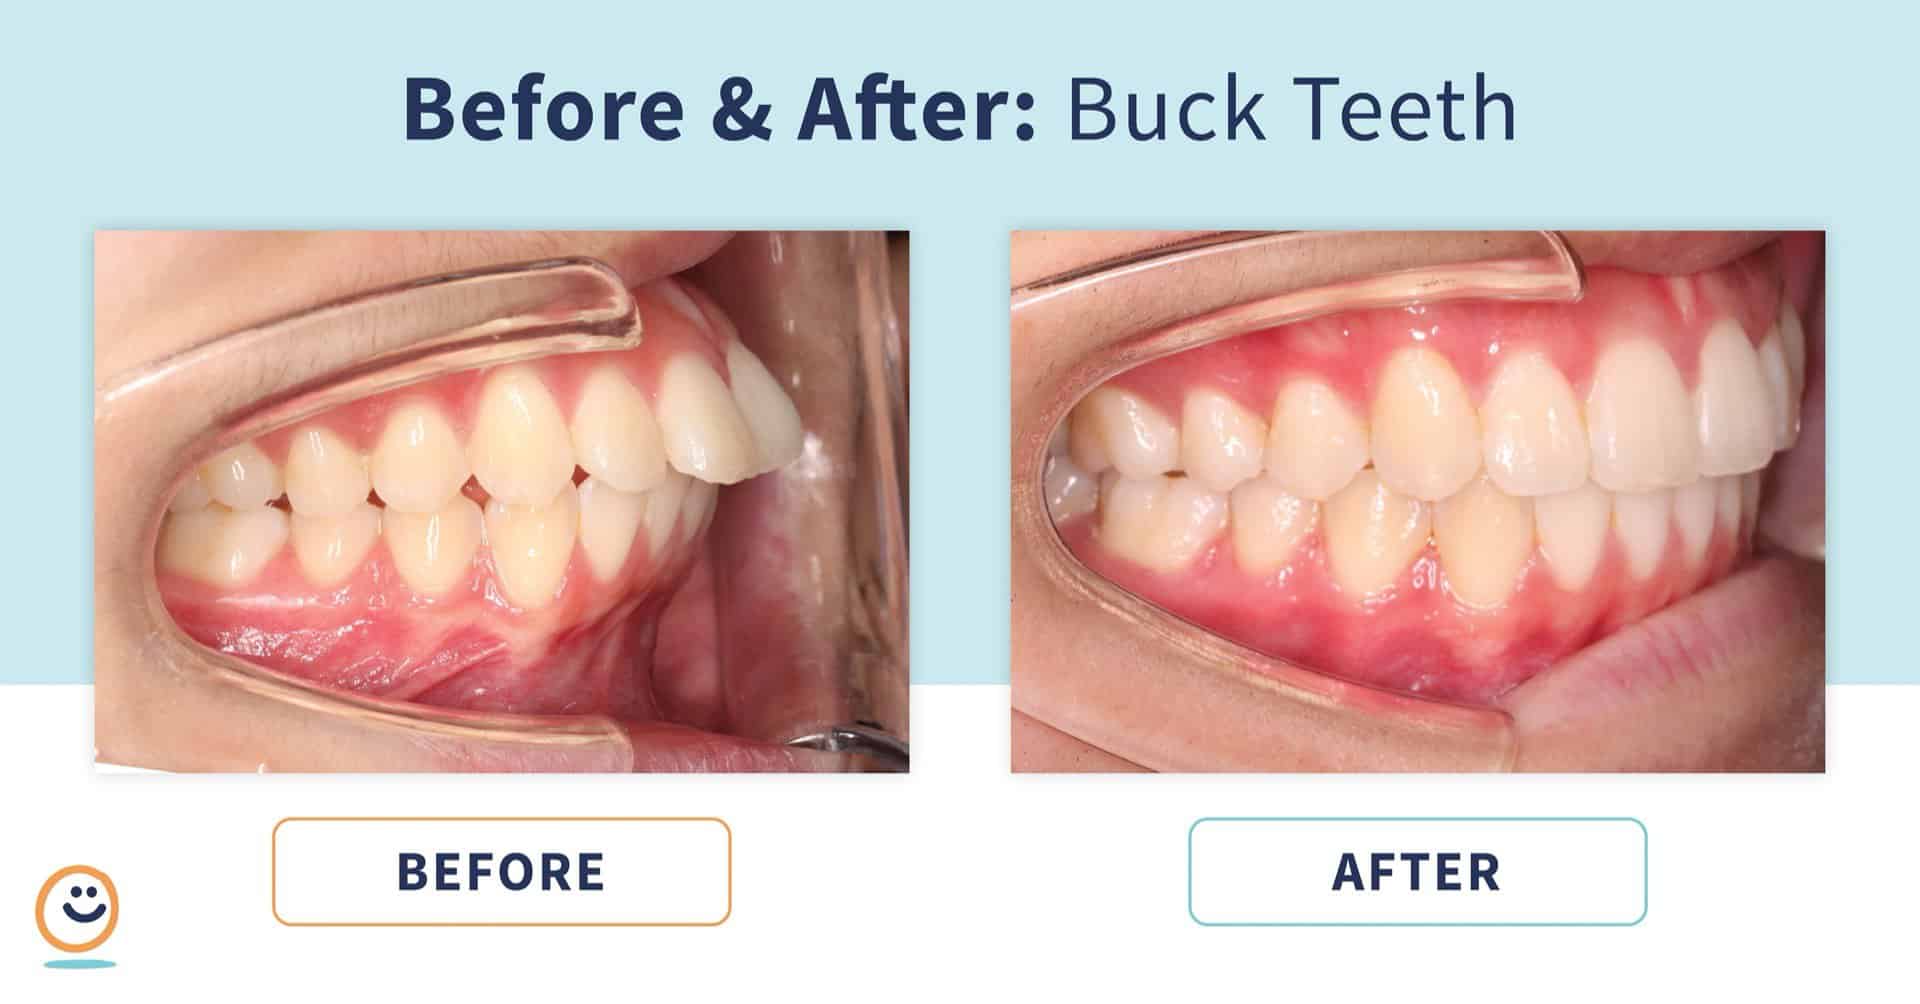 Astrolabe Ved naturpark Braces: Before and After Buck Teeth